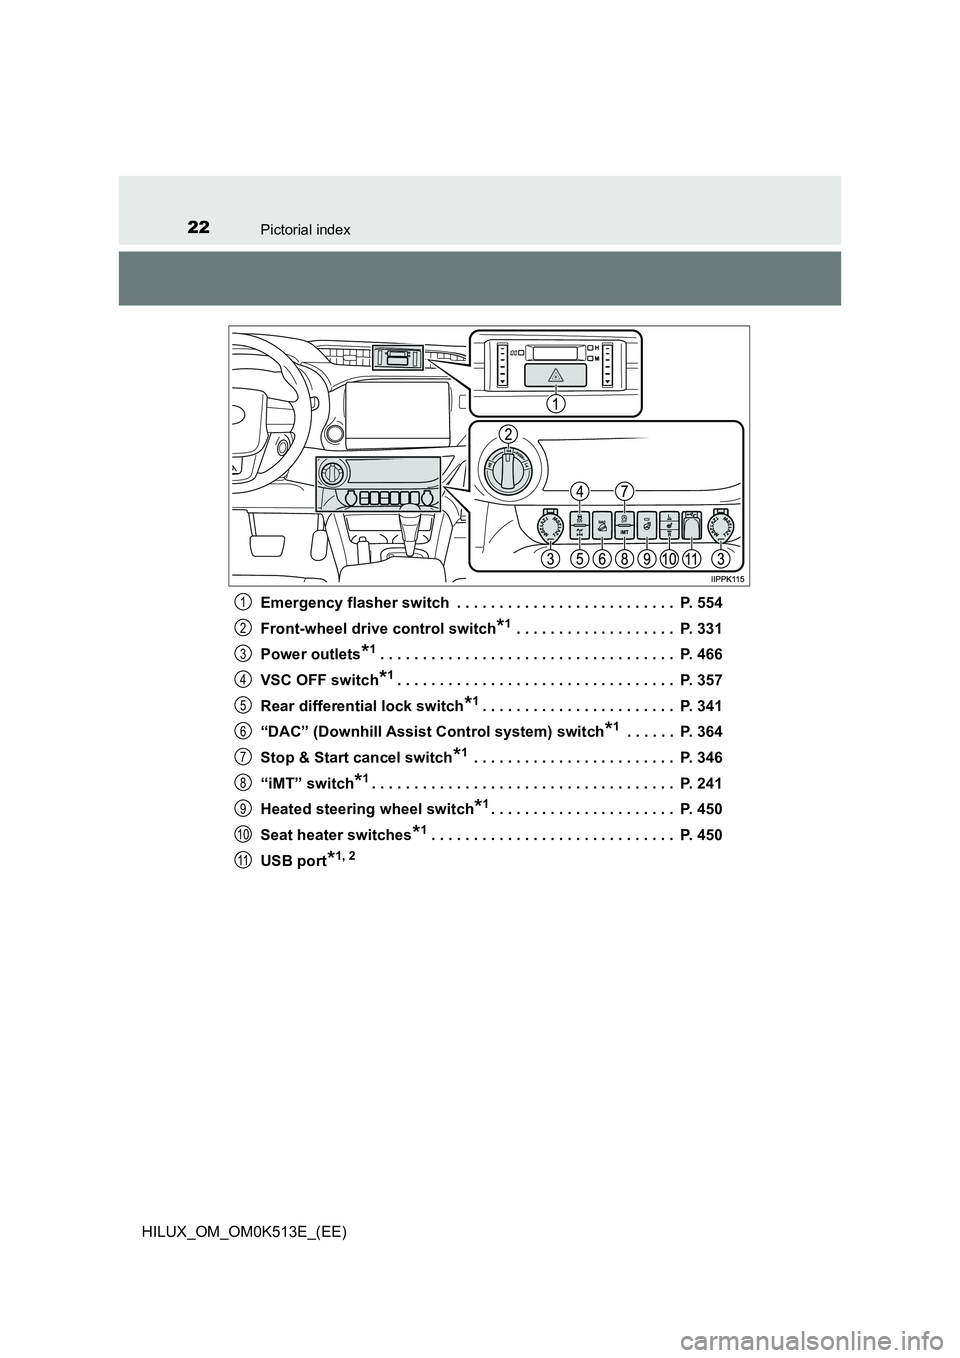 TOYOTA HILUX 2021  Owners Manual (in English) 22Pictorial index
HILUX_OM_OM0K513E_(EE) 
Emergency flasher switch  . . . . . . . . . . . . . . . . . . . . . . . . . .  P. 554 
Front-wheel drive control switch*1 . . . . . . . . . . . . . . . . . . 